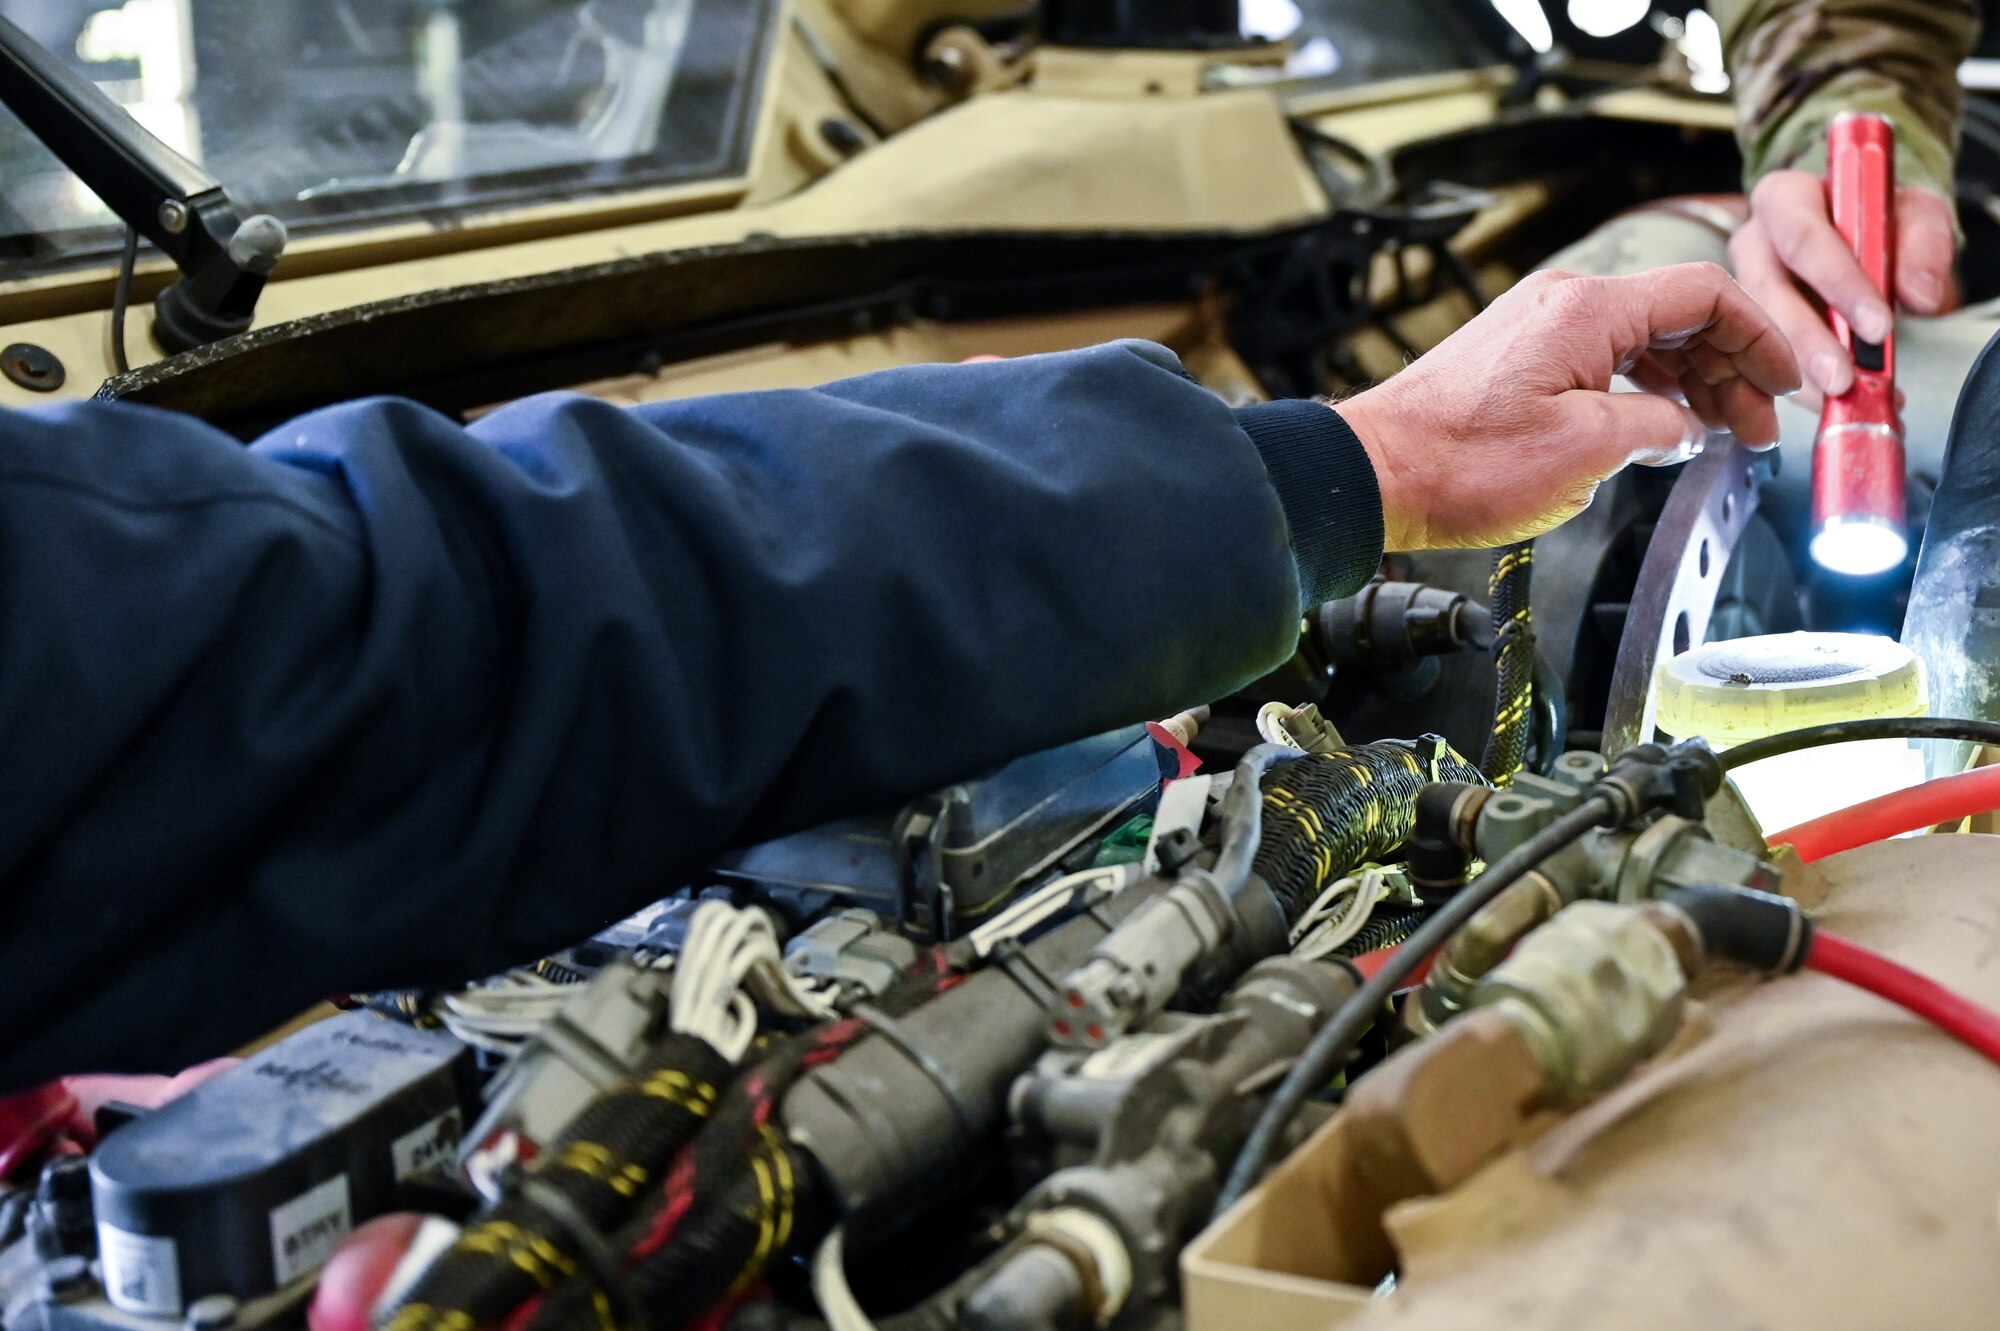 Mark Bramman, 90th Logistics Readiness Squadron vehicle maintenance craftsman, checks the electrical, brake, fuel, cooling and other systems for serviceability as part of a Joint Light Tactical Vehicle limited technical inspection at F.E. Warren Air Force Base, Wyoming, Oct 25, 2022. The 90 LRS is tasked with preparing the next generation of security forces vehicles sent to protect the 90th Missile Wing's ICBM system as part of Air Force Global Strike Command’s priority to modernize. (U.S. Air Force photo by Joseph Coslett)